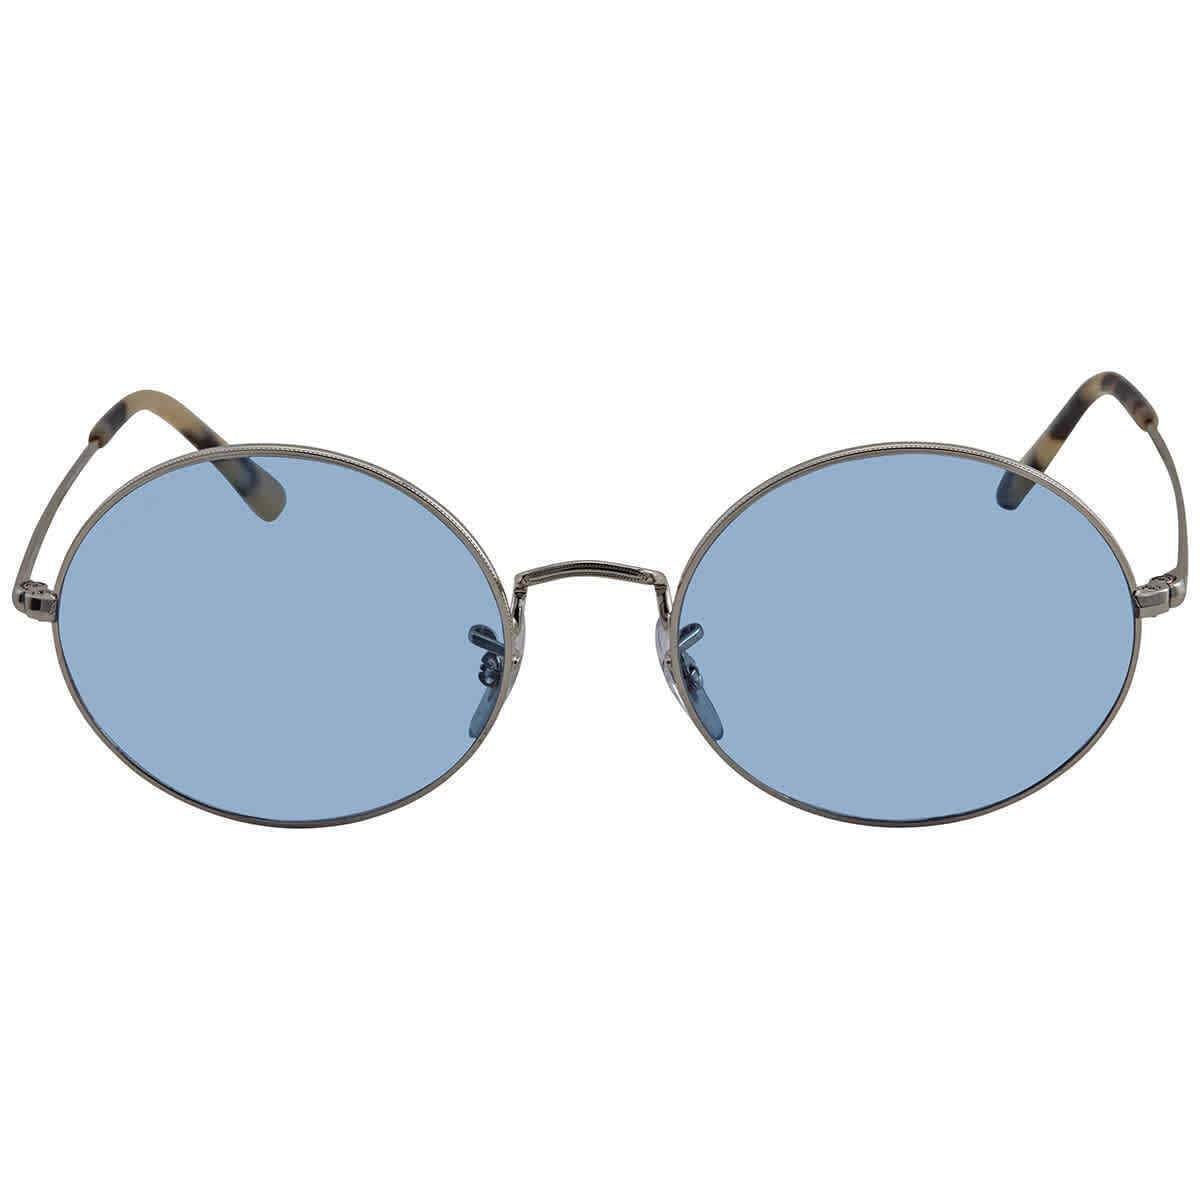 Ray Ban Oval 1970 Unisex Azure/Blue Gradient Round Sunglasses RB1970 919756 54